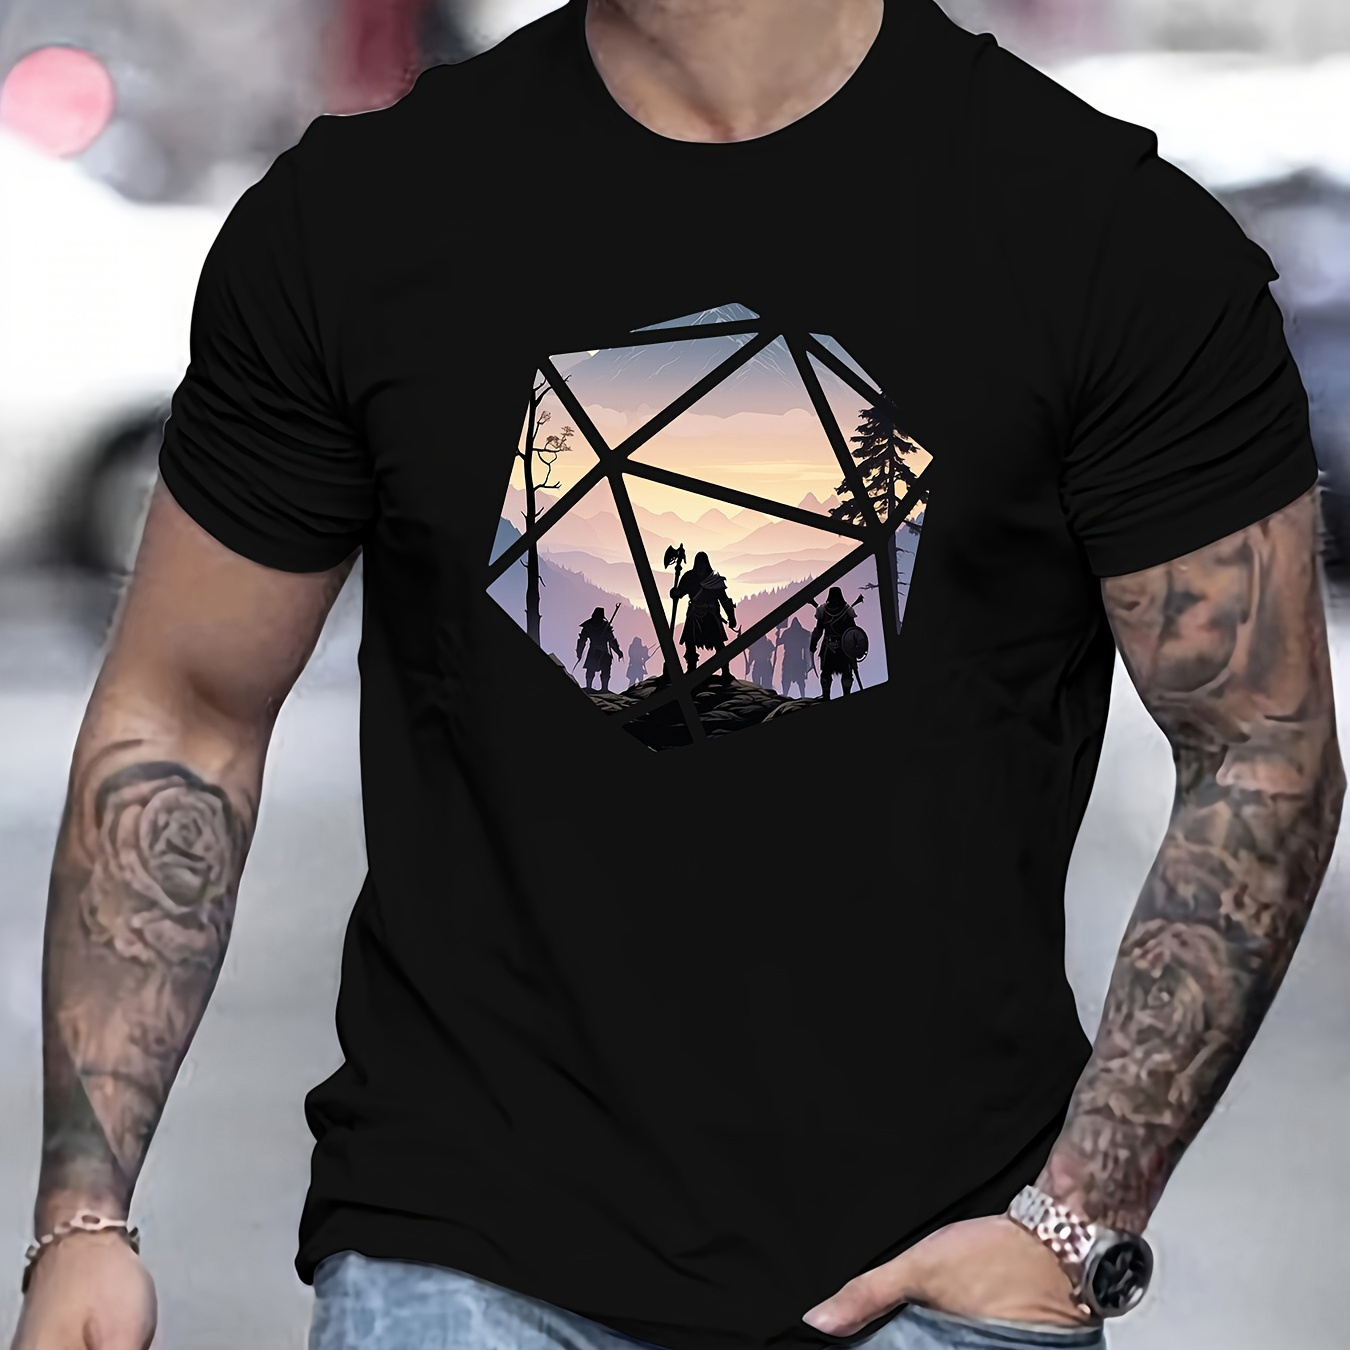 

Viking People On A Dice Print T Shirt, Tees For Men, Casual Short Sleeve T-shirt For Summer